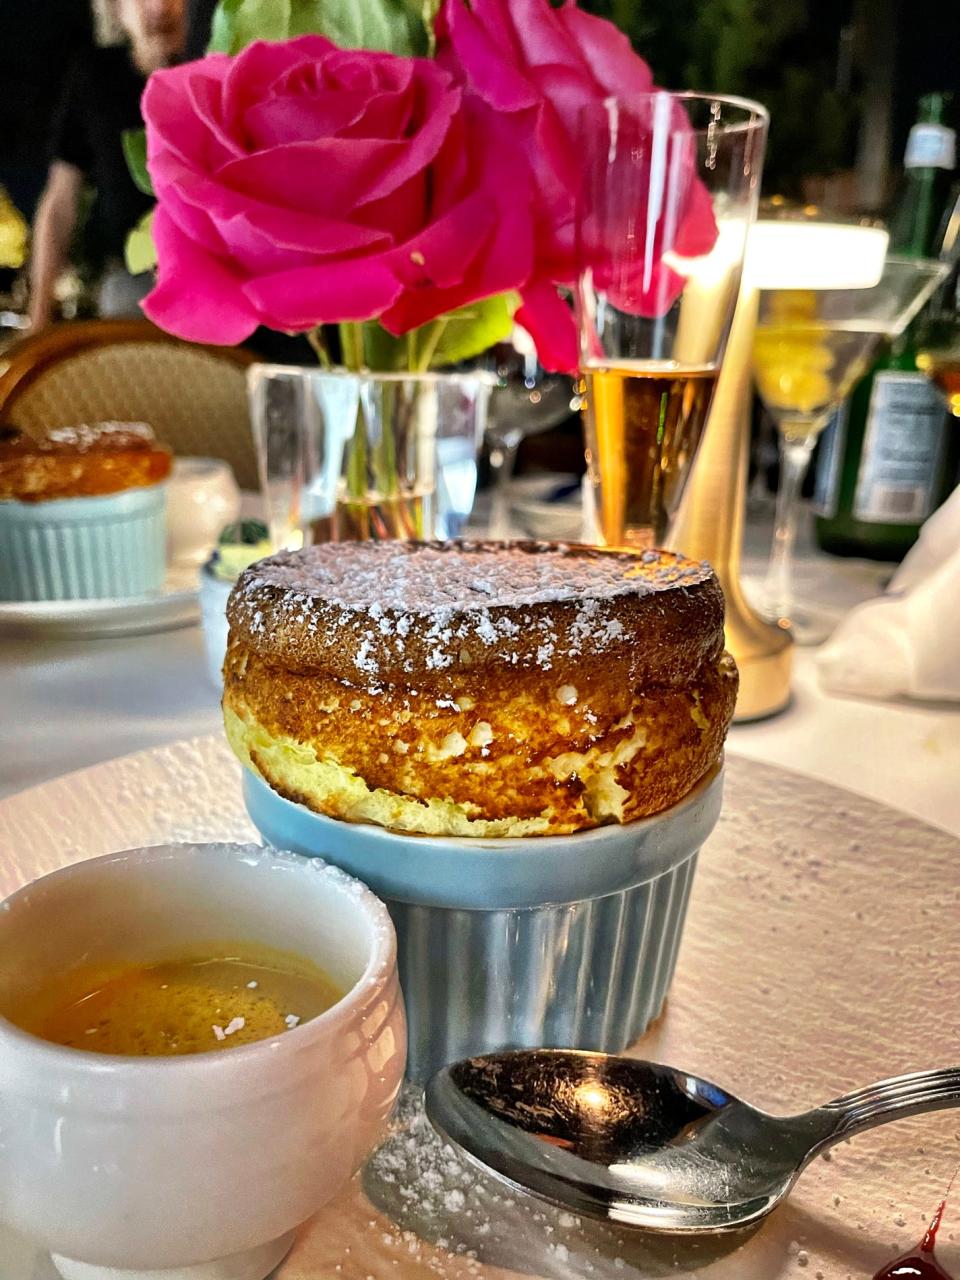 The Grand Marnier soufflé became 2023's most popular dish at Café L’Europe.